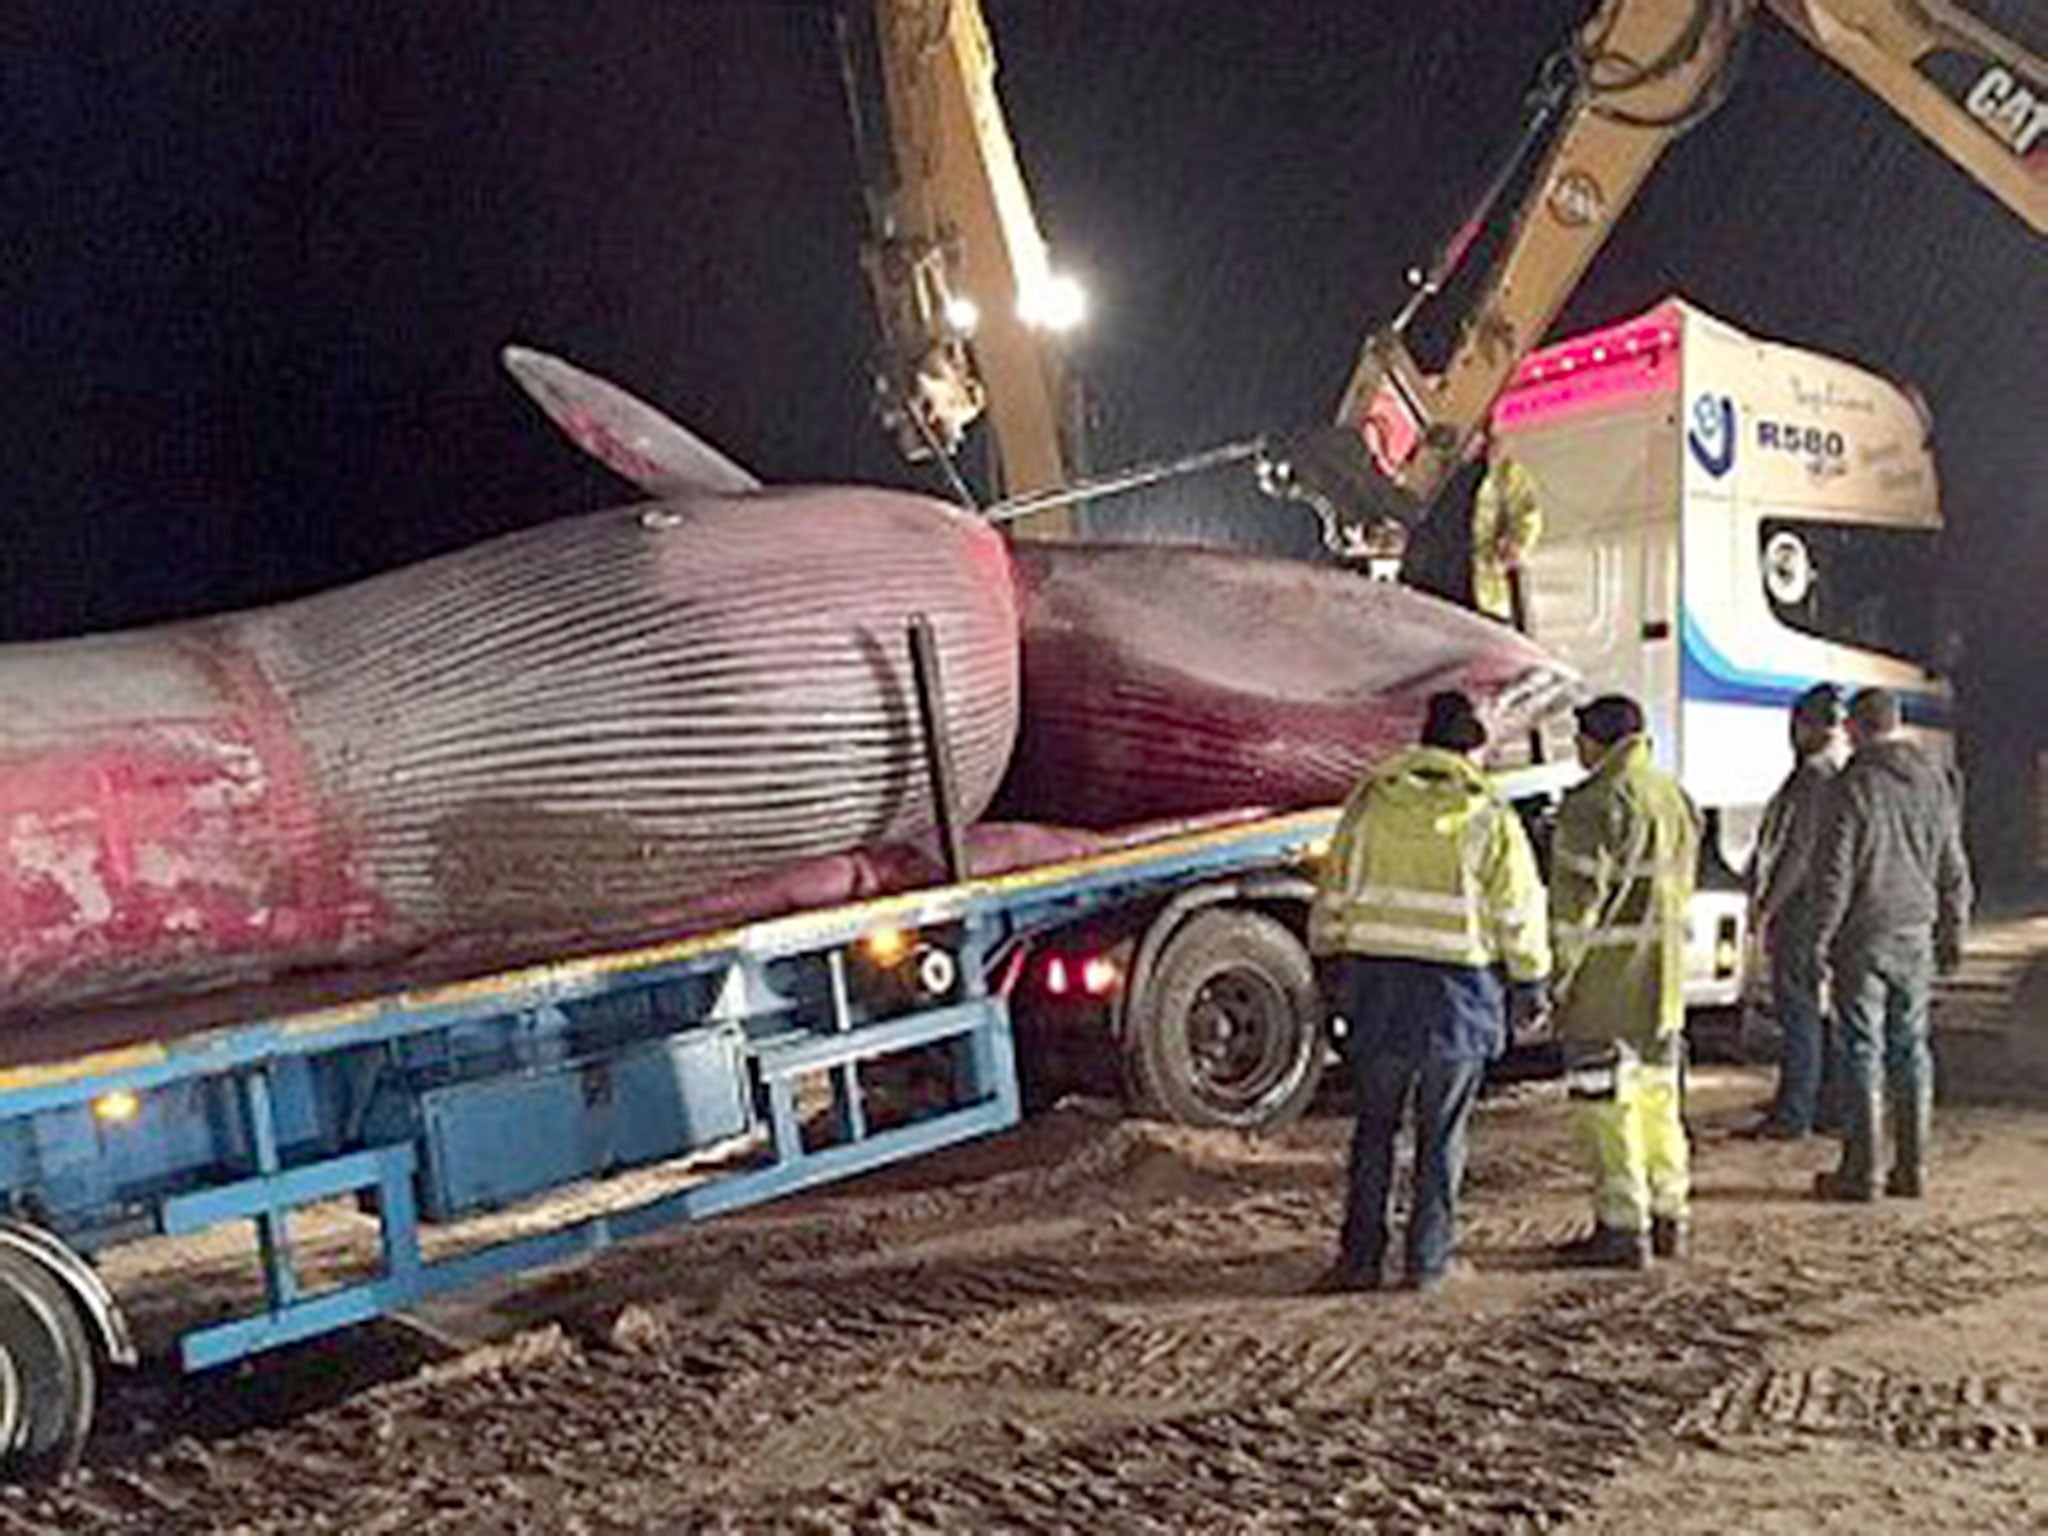 Three diggers were needed to move the whale's carcass